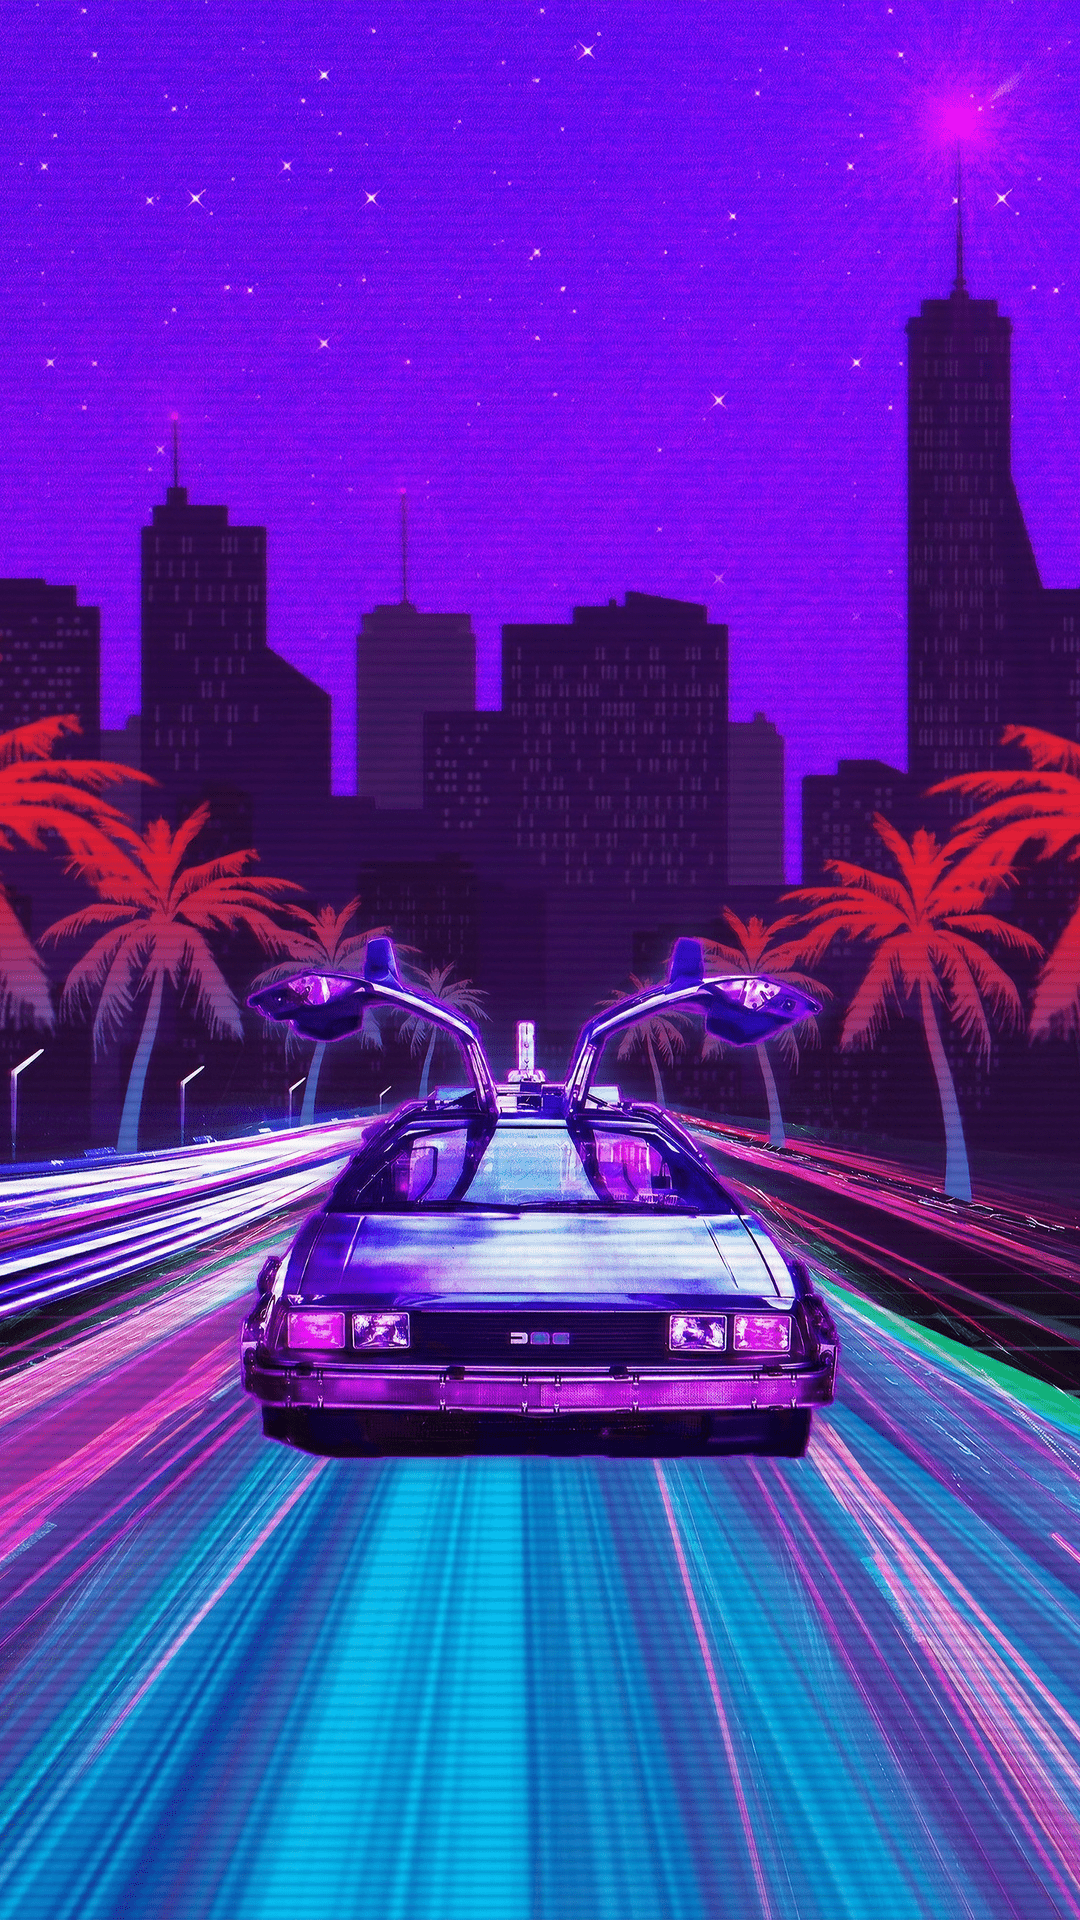 Back to the future delorean 80s synthwave art phone wallpaper - Synthwave